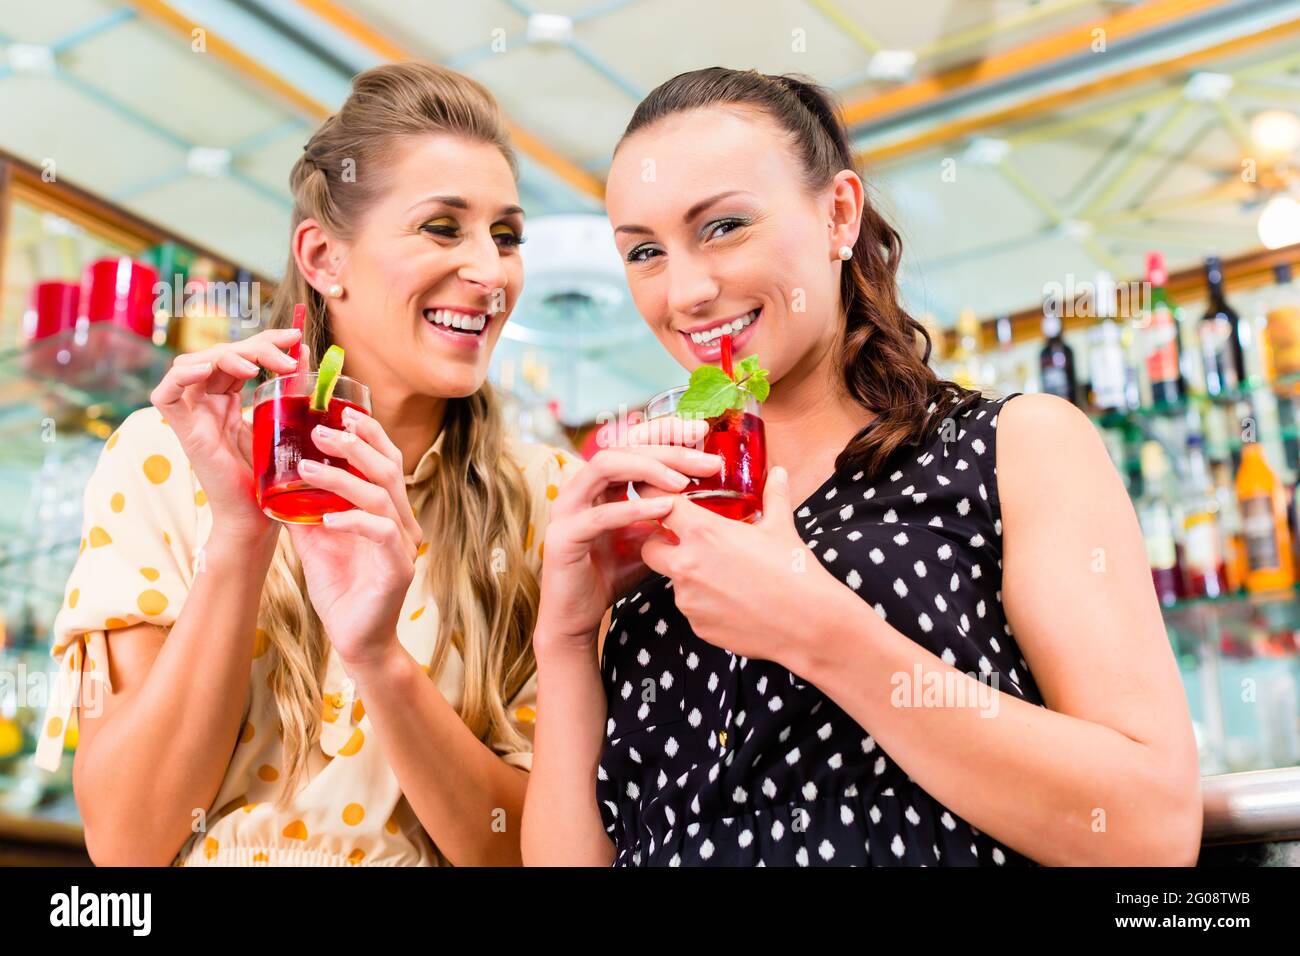 Two women friends in cafe bar drinking long drink or cocktails Stock Photo